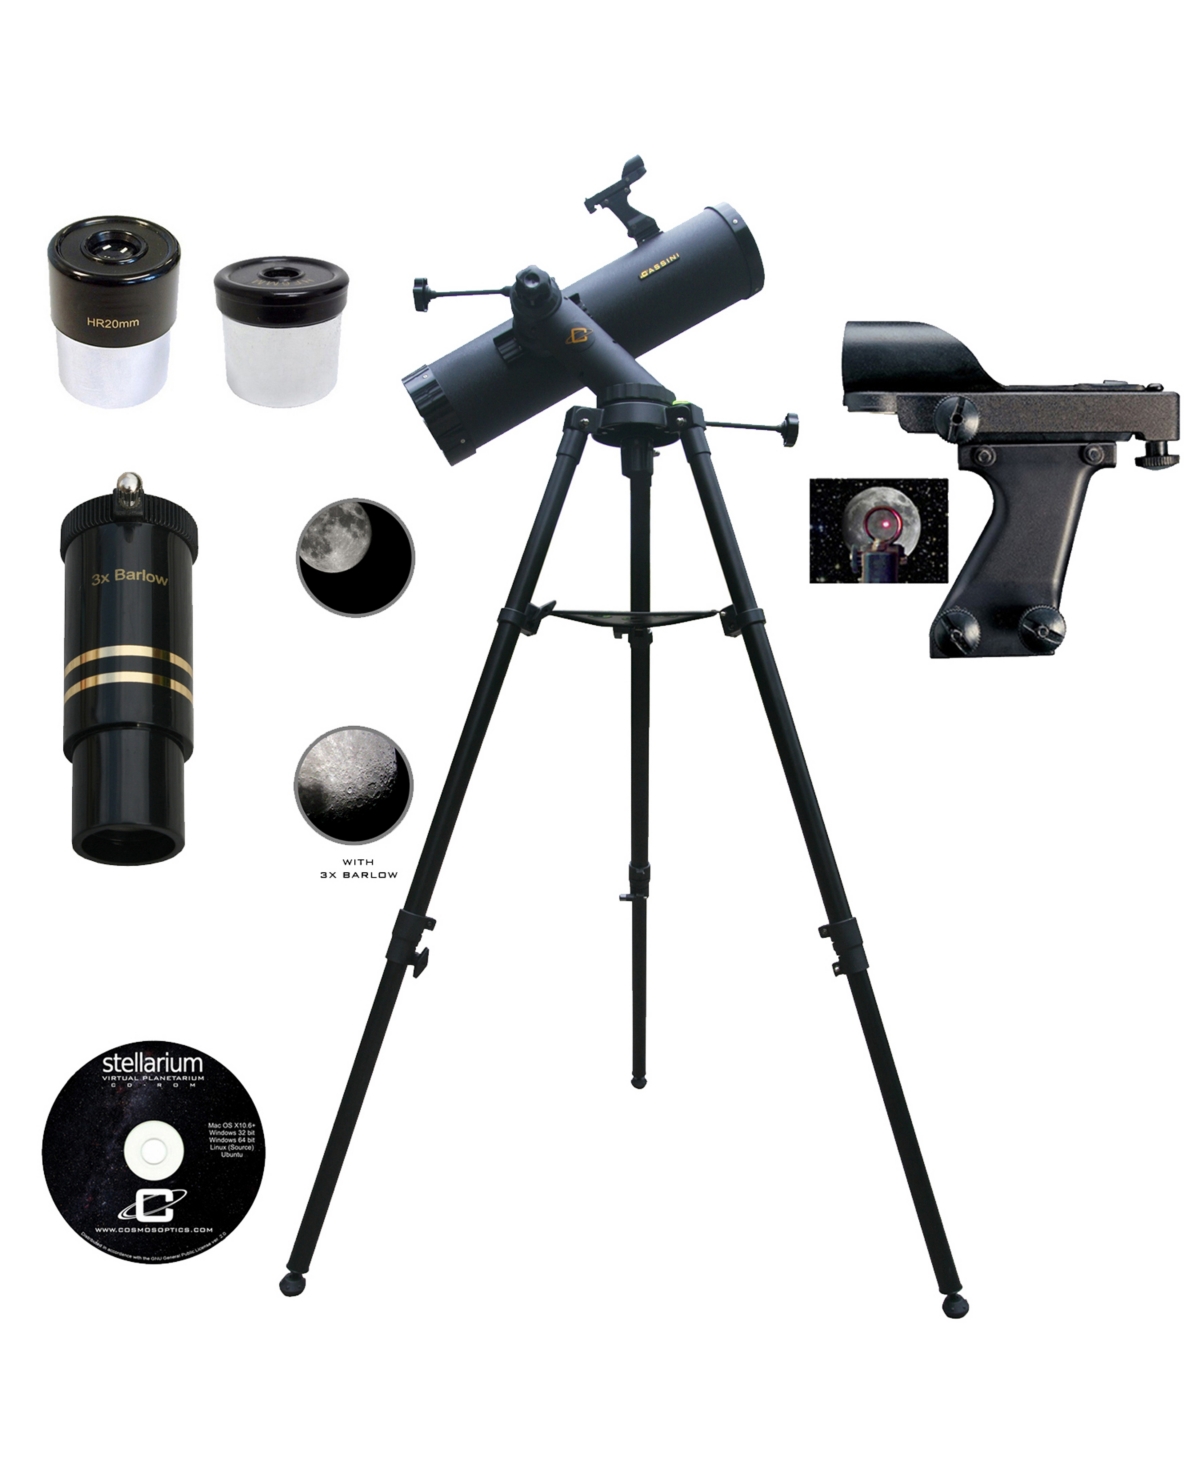 Cosmo Brands Cassini 640 X 102mm Tracker Mount Astronomical Telescope And Red Dot Finderscope In Black